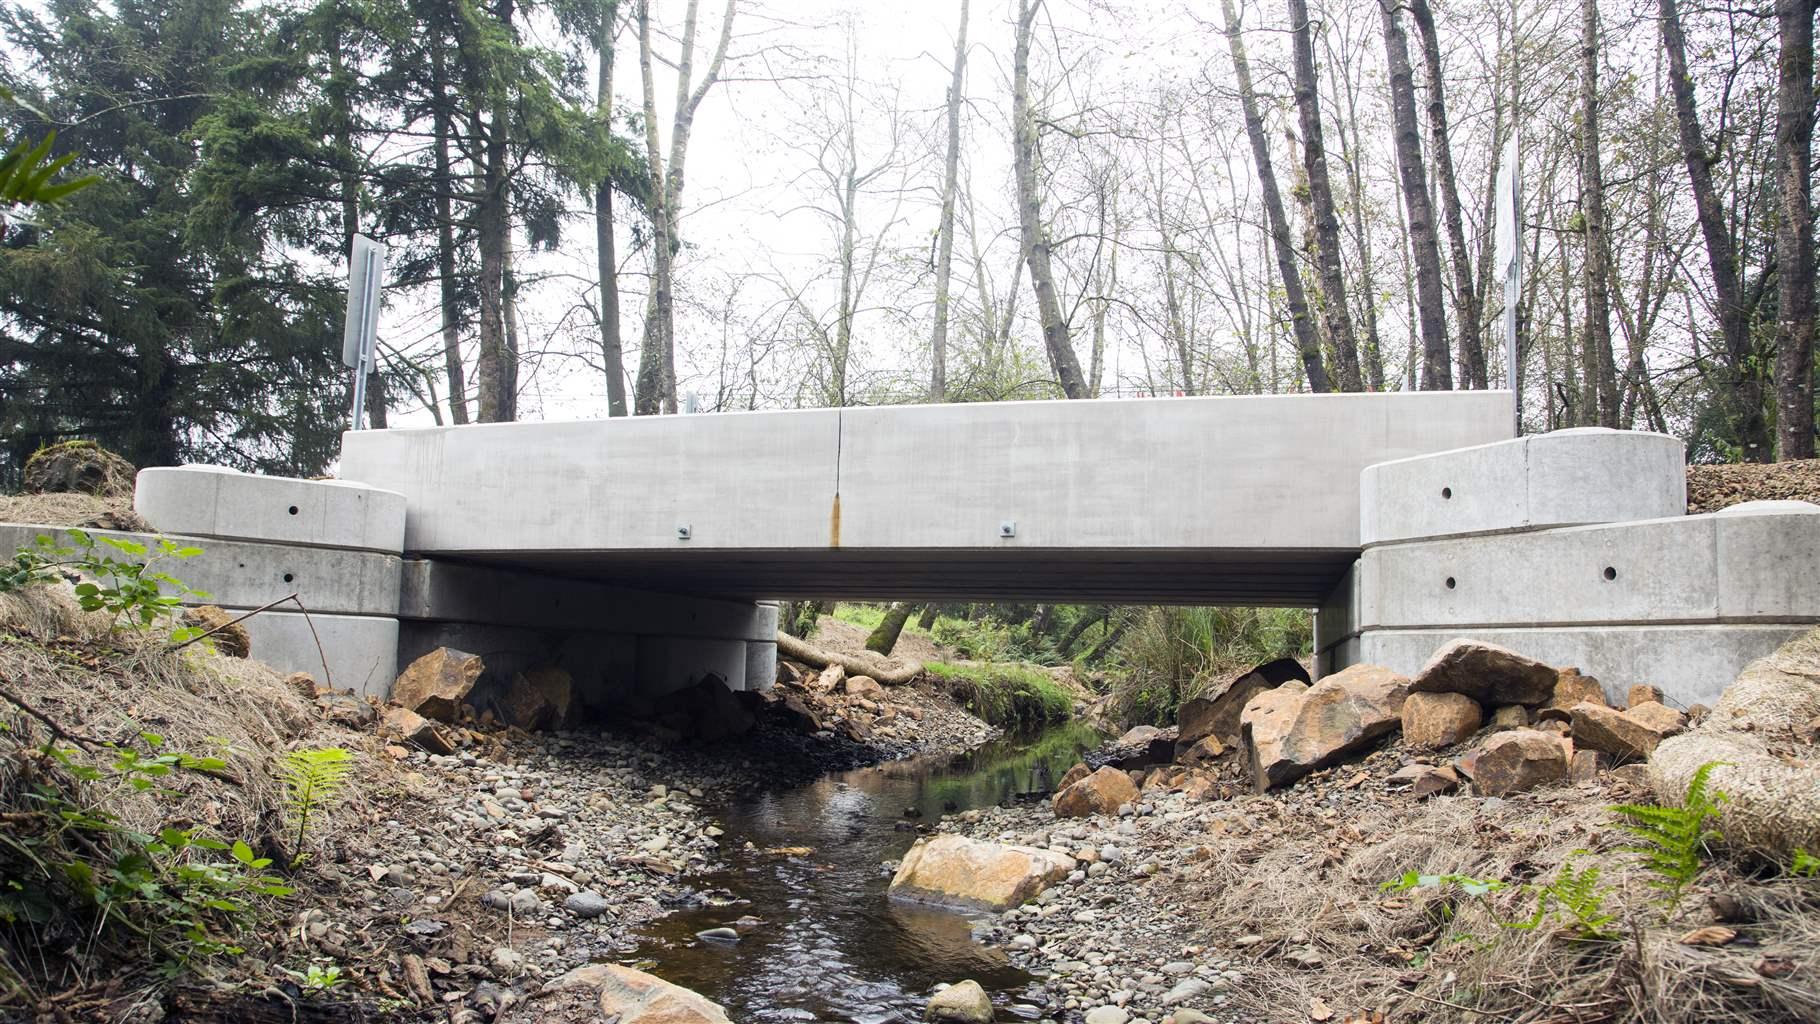 This bridge over Oregon’s Tomlinson Creek replaced a culvert, a project that restored the steam’s natural flow and allows for fish passage.